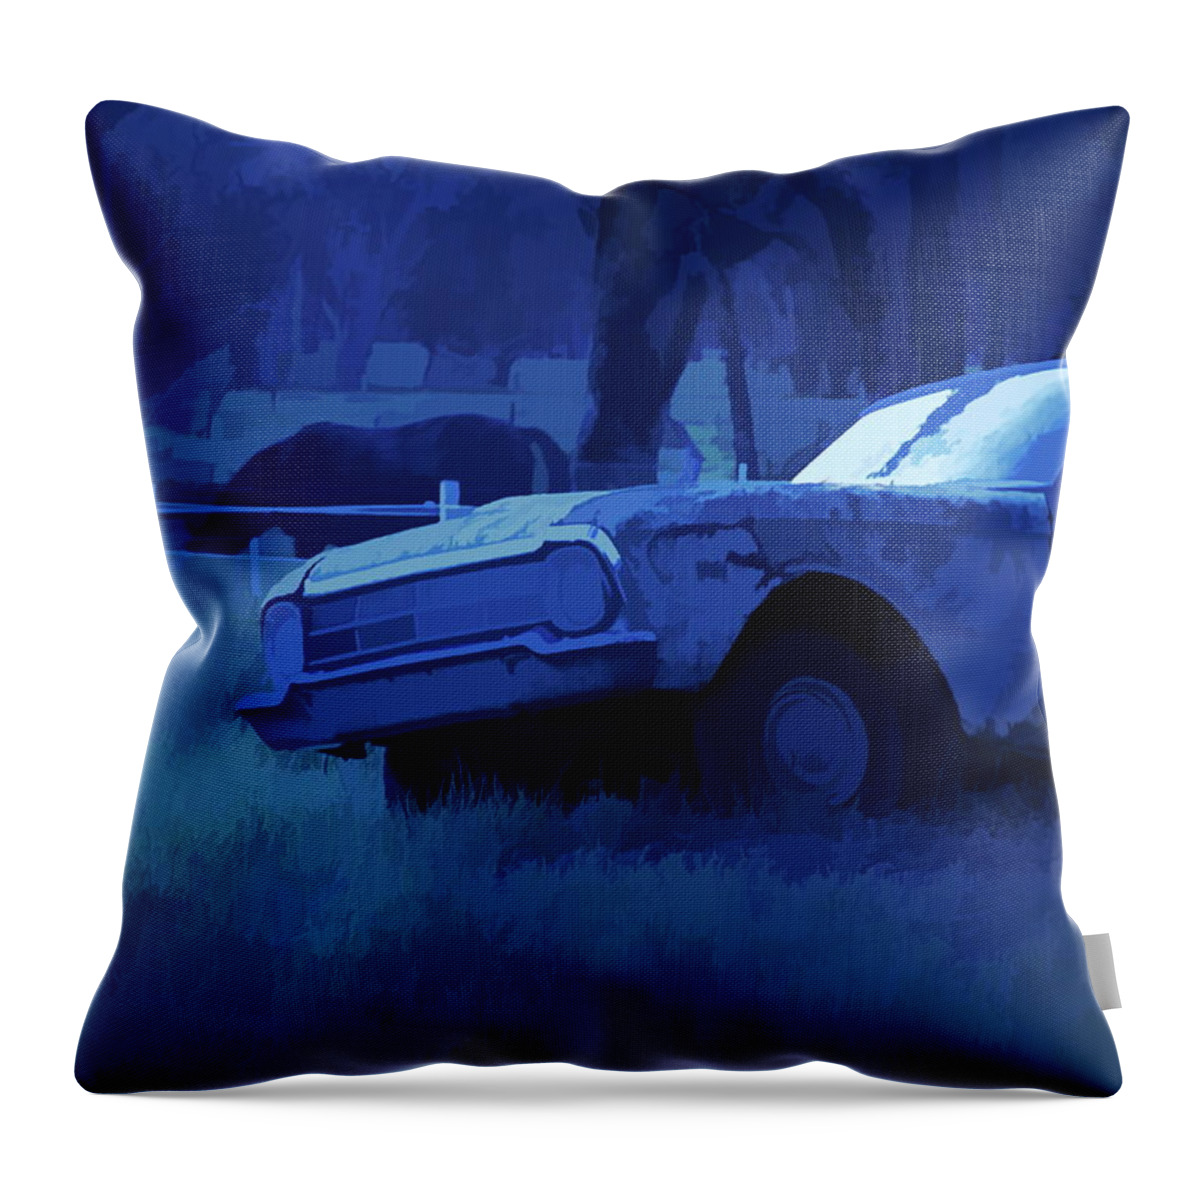 Ford Falcon Ute Throw Pillow featuring the mixed media Semi-Abstract 1960s Classic Ford Falcon Ute And Horse by Joan Stratton